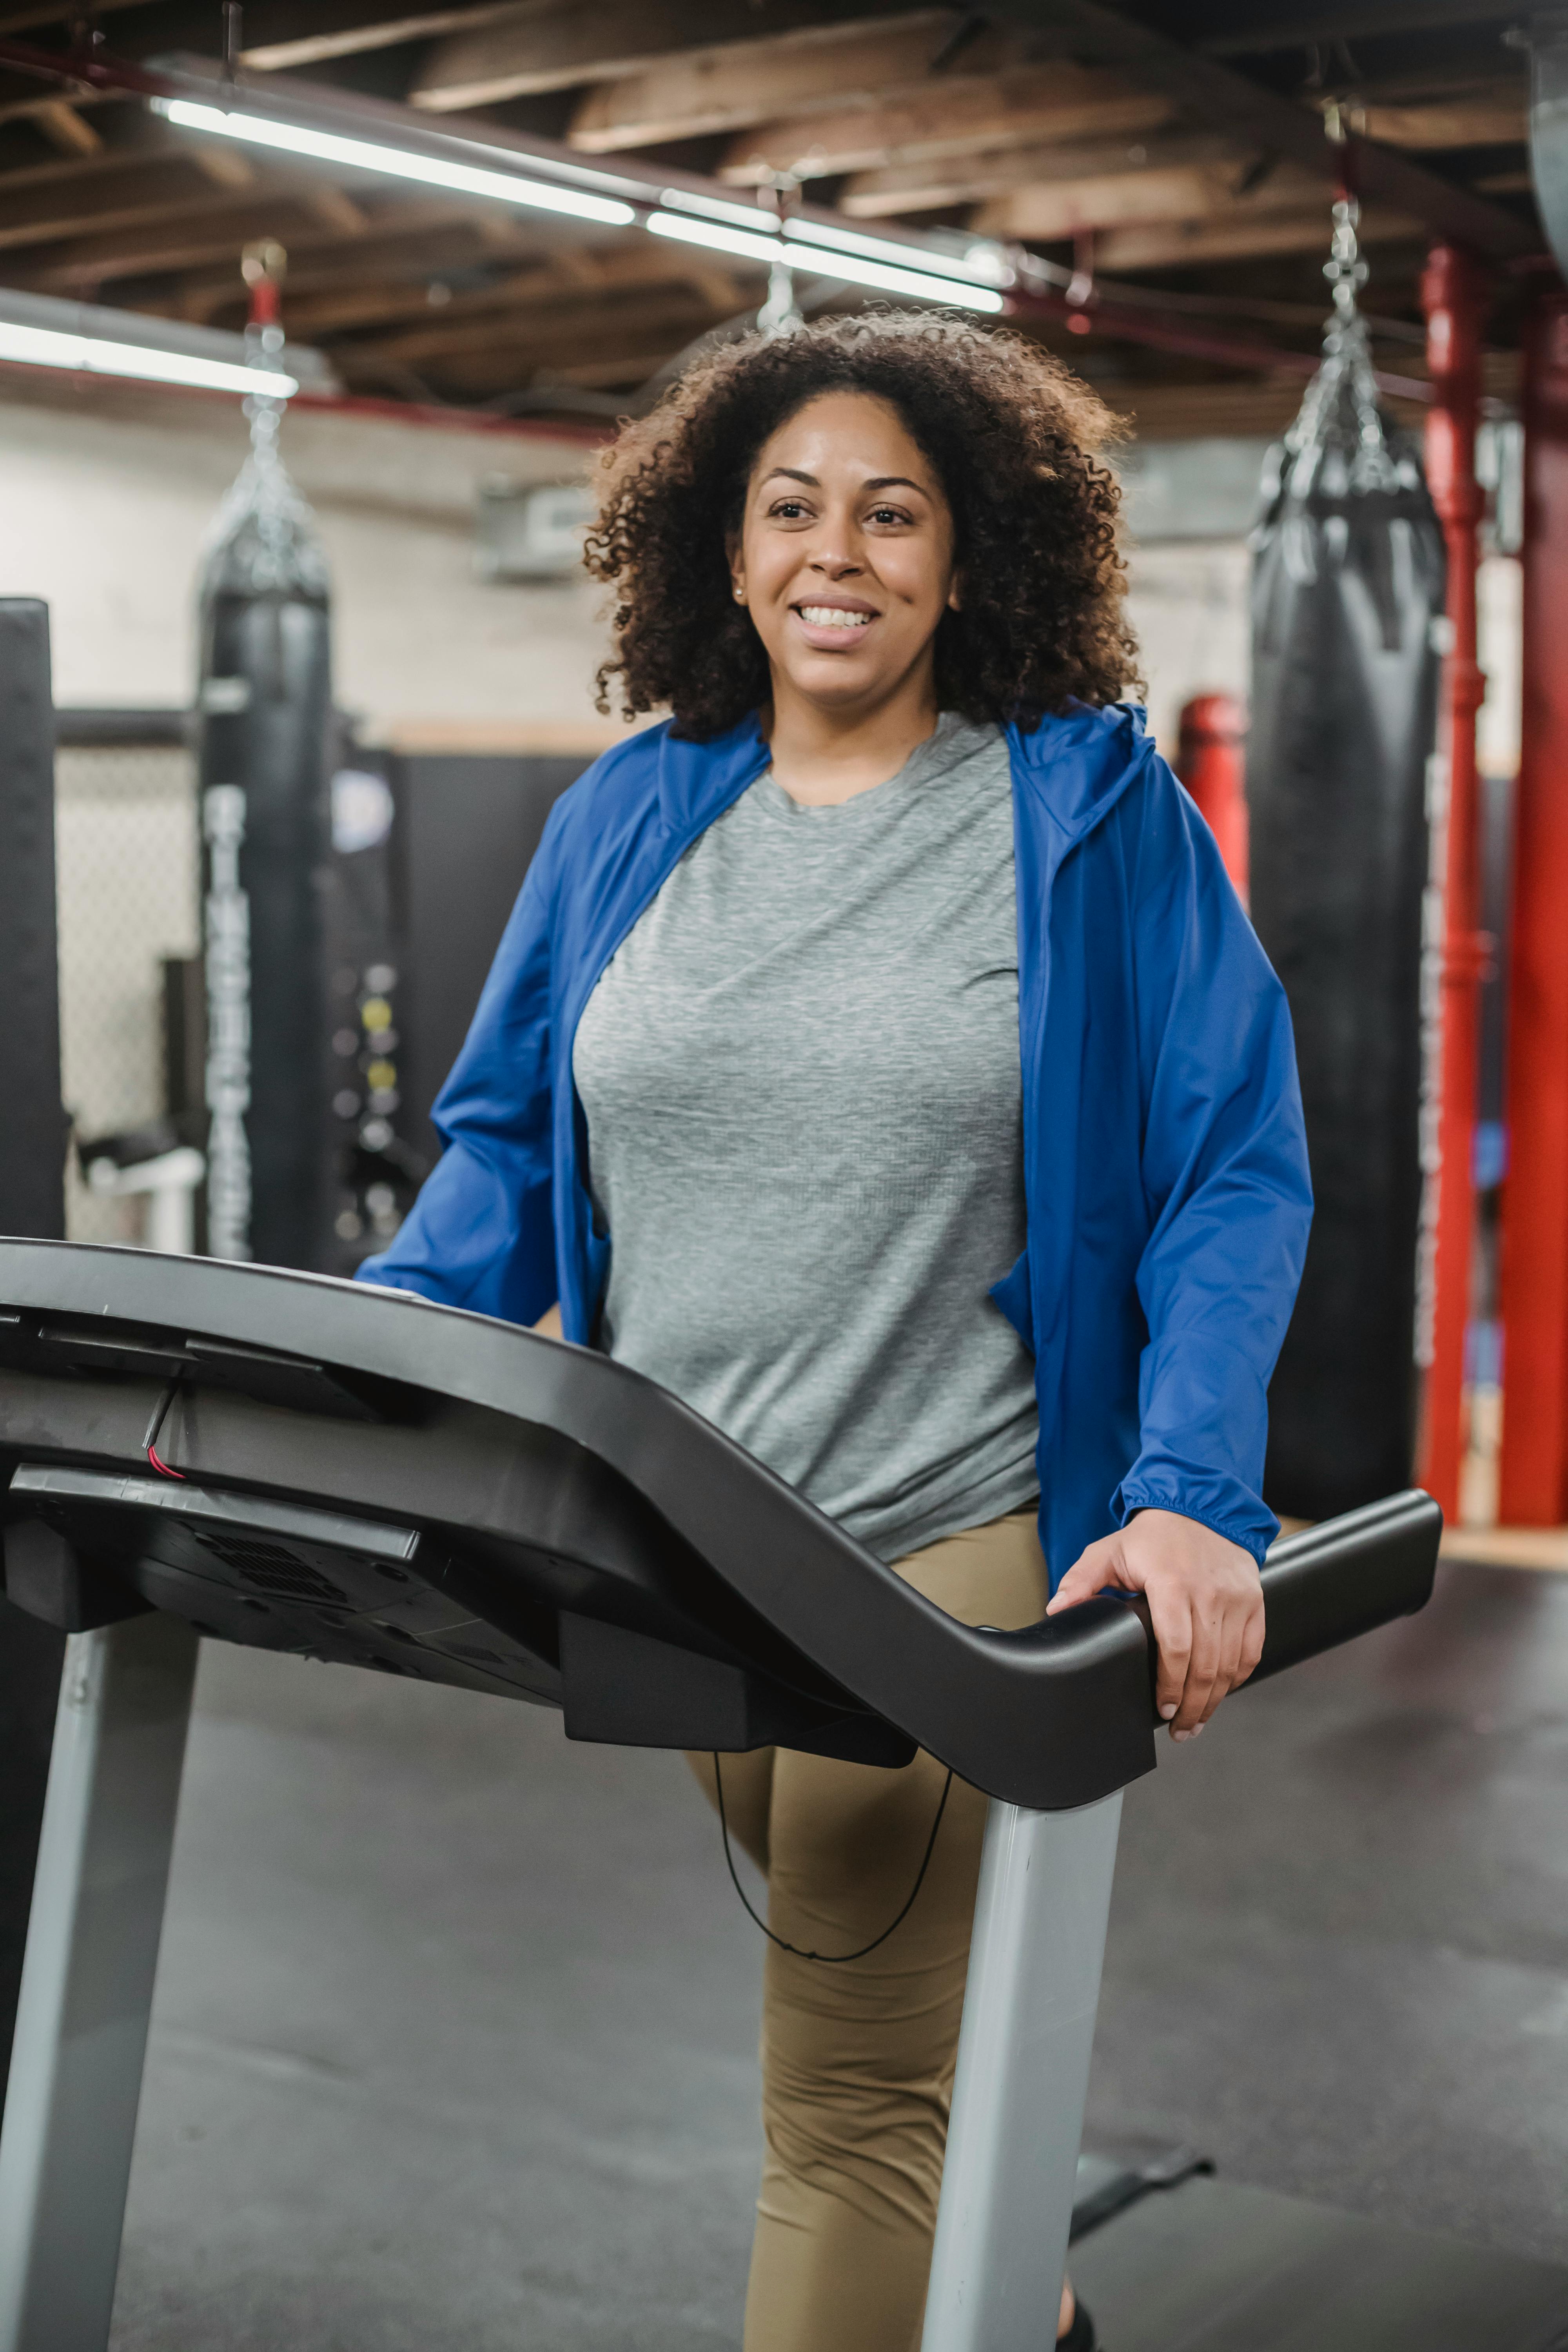 smiling woman on treadmill in gym